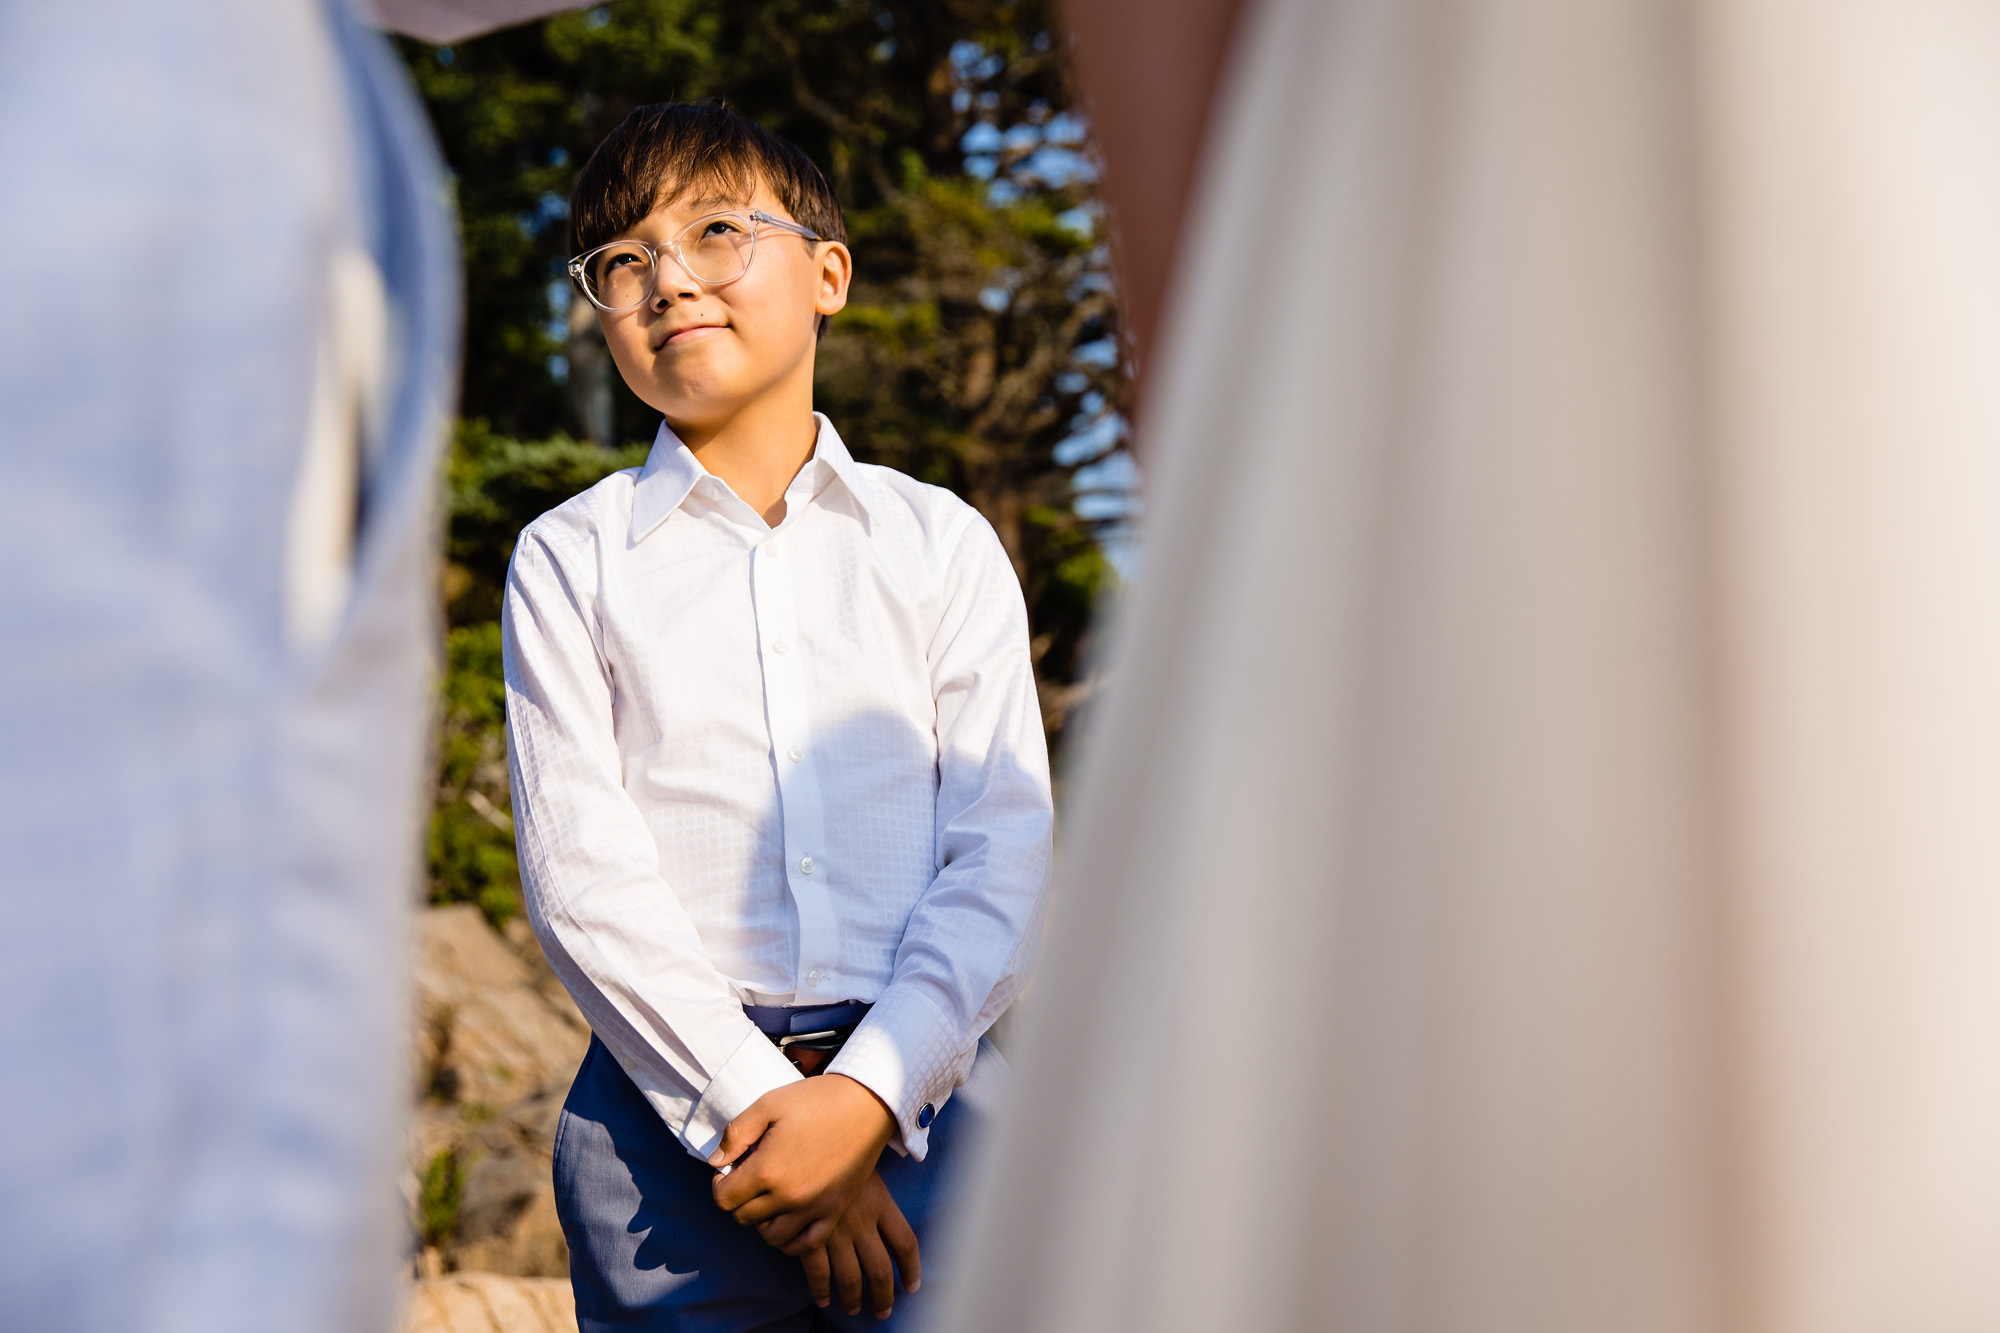 The groom's son looks up at his dad during an Acadia elopement ceremony